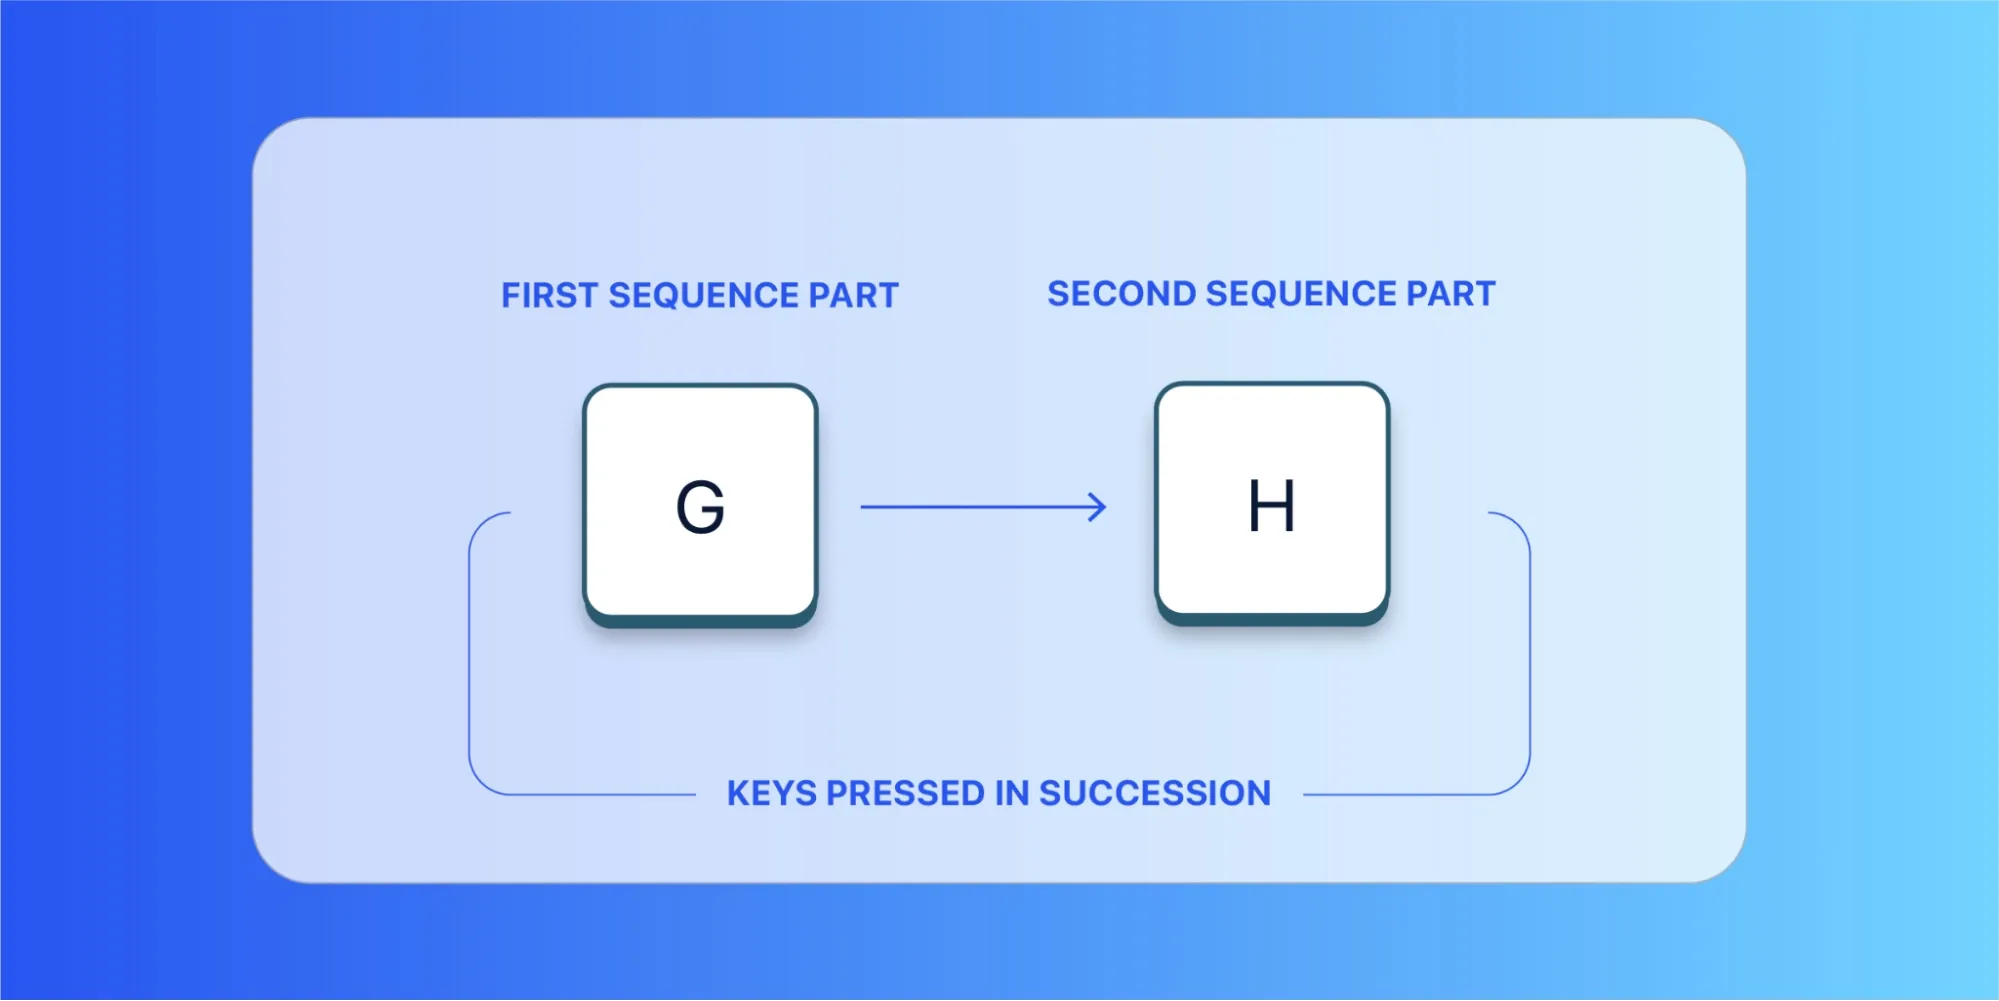 Visual diagram of a "sequence" shortcut, where keys are pressed in succession. In this example, the "G" key is pressed before the "H" key.